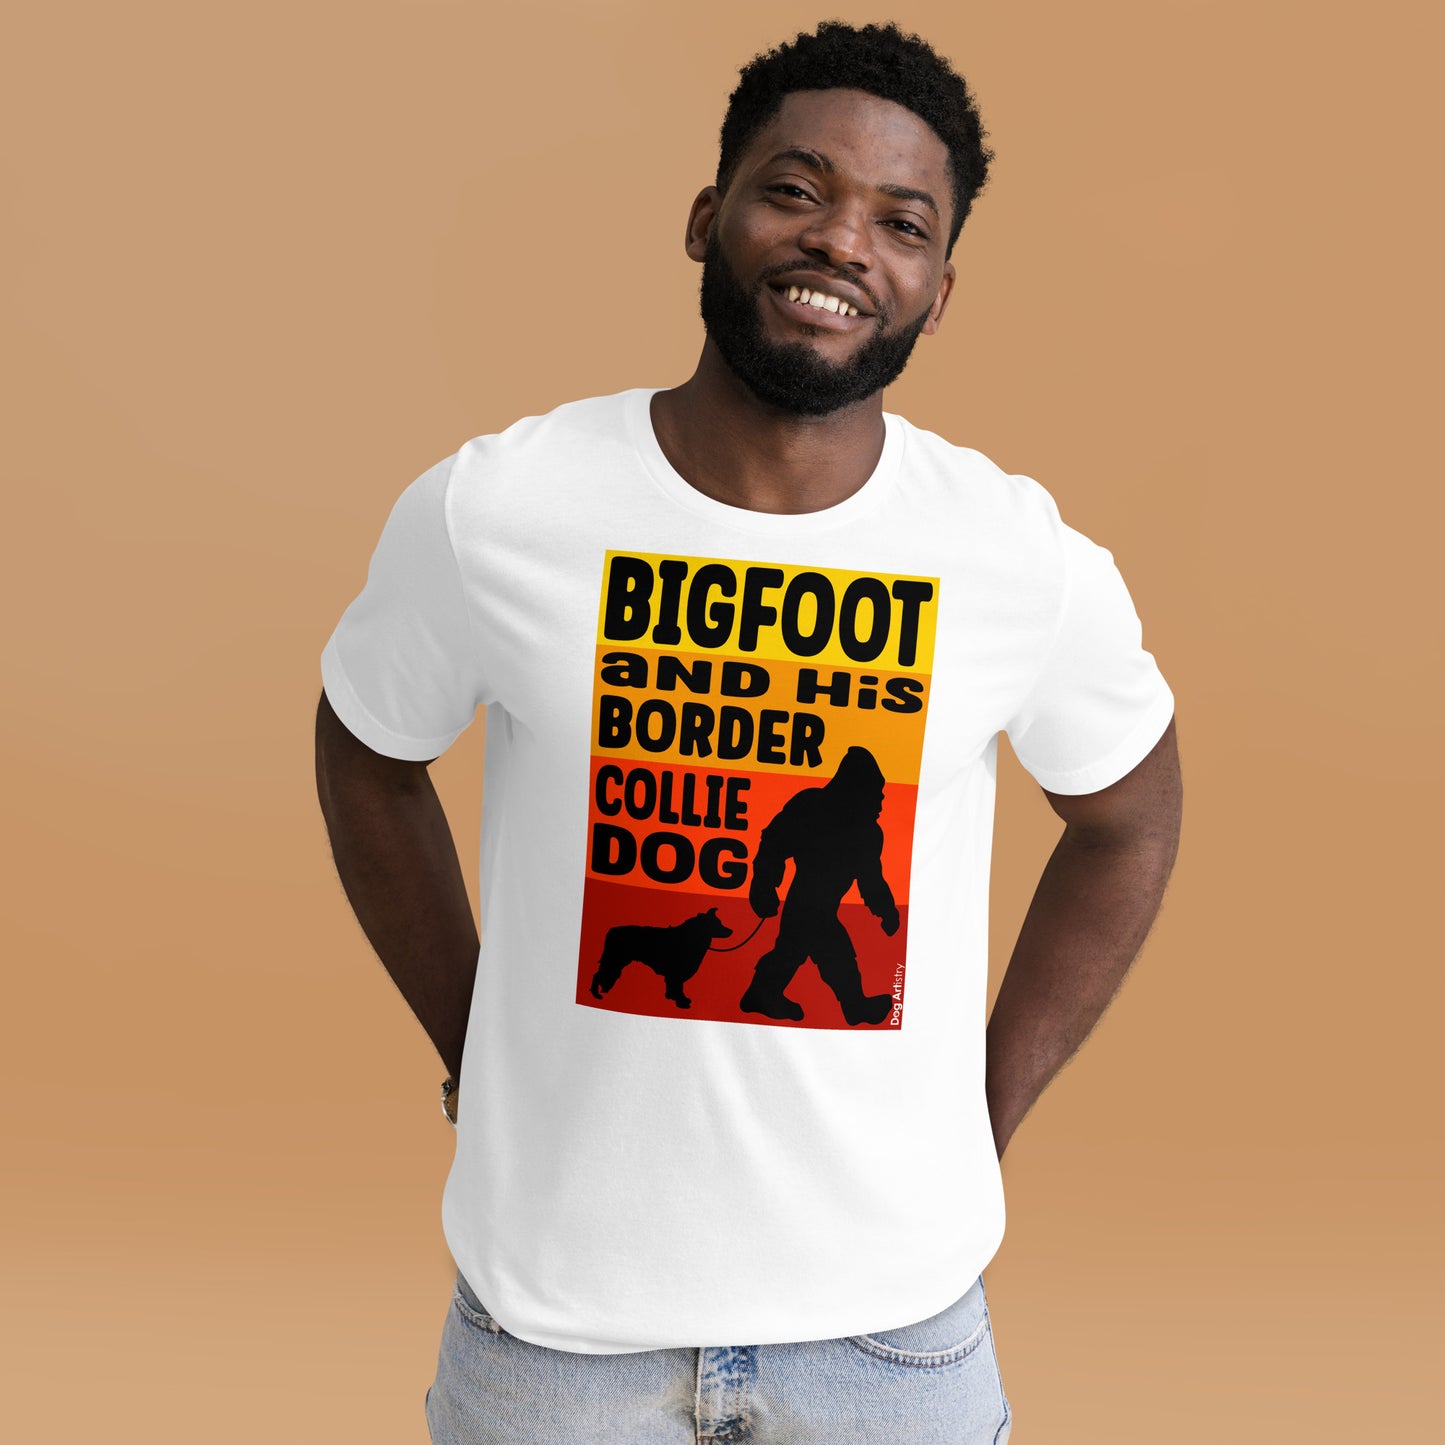 Big foot and his Border Collie unisex white t-shirt by Dog Artistry.